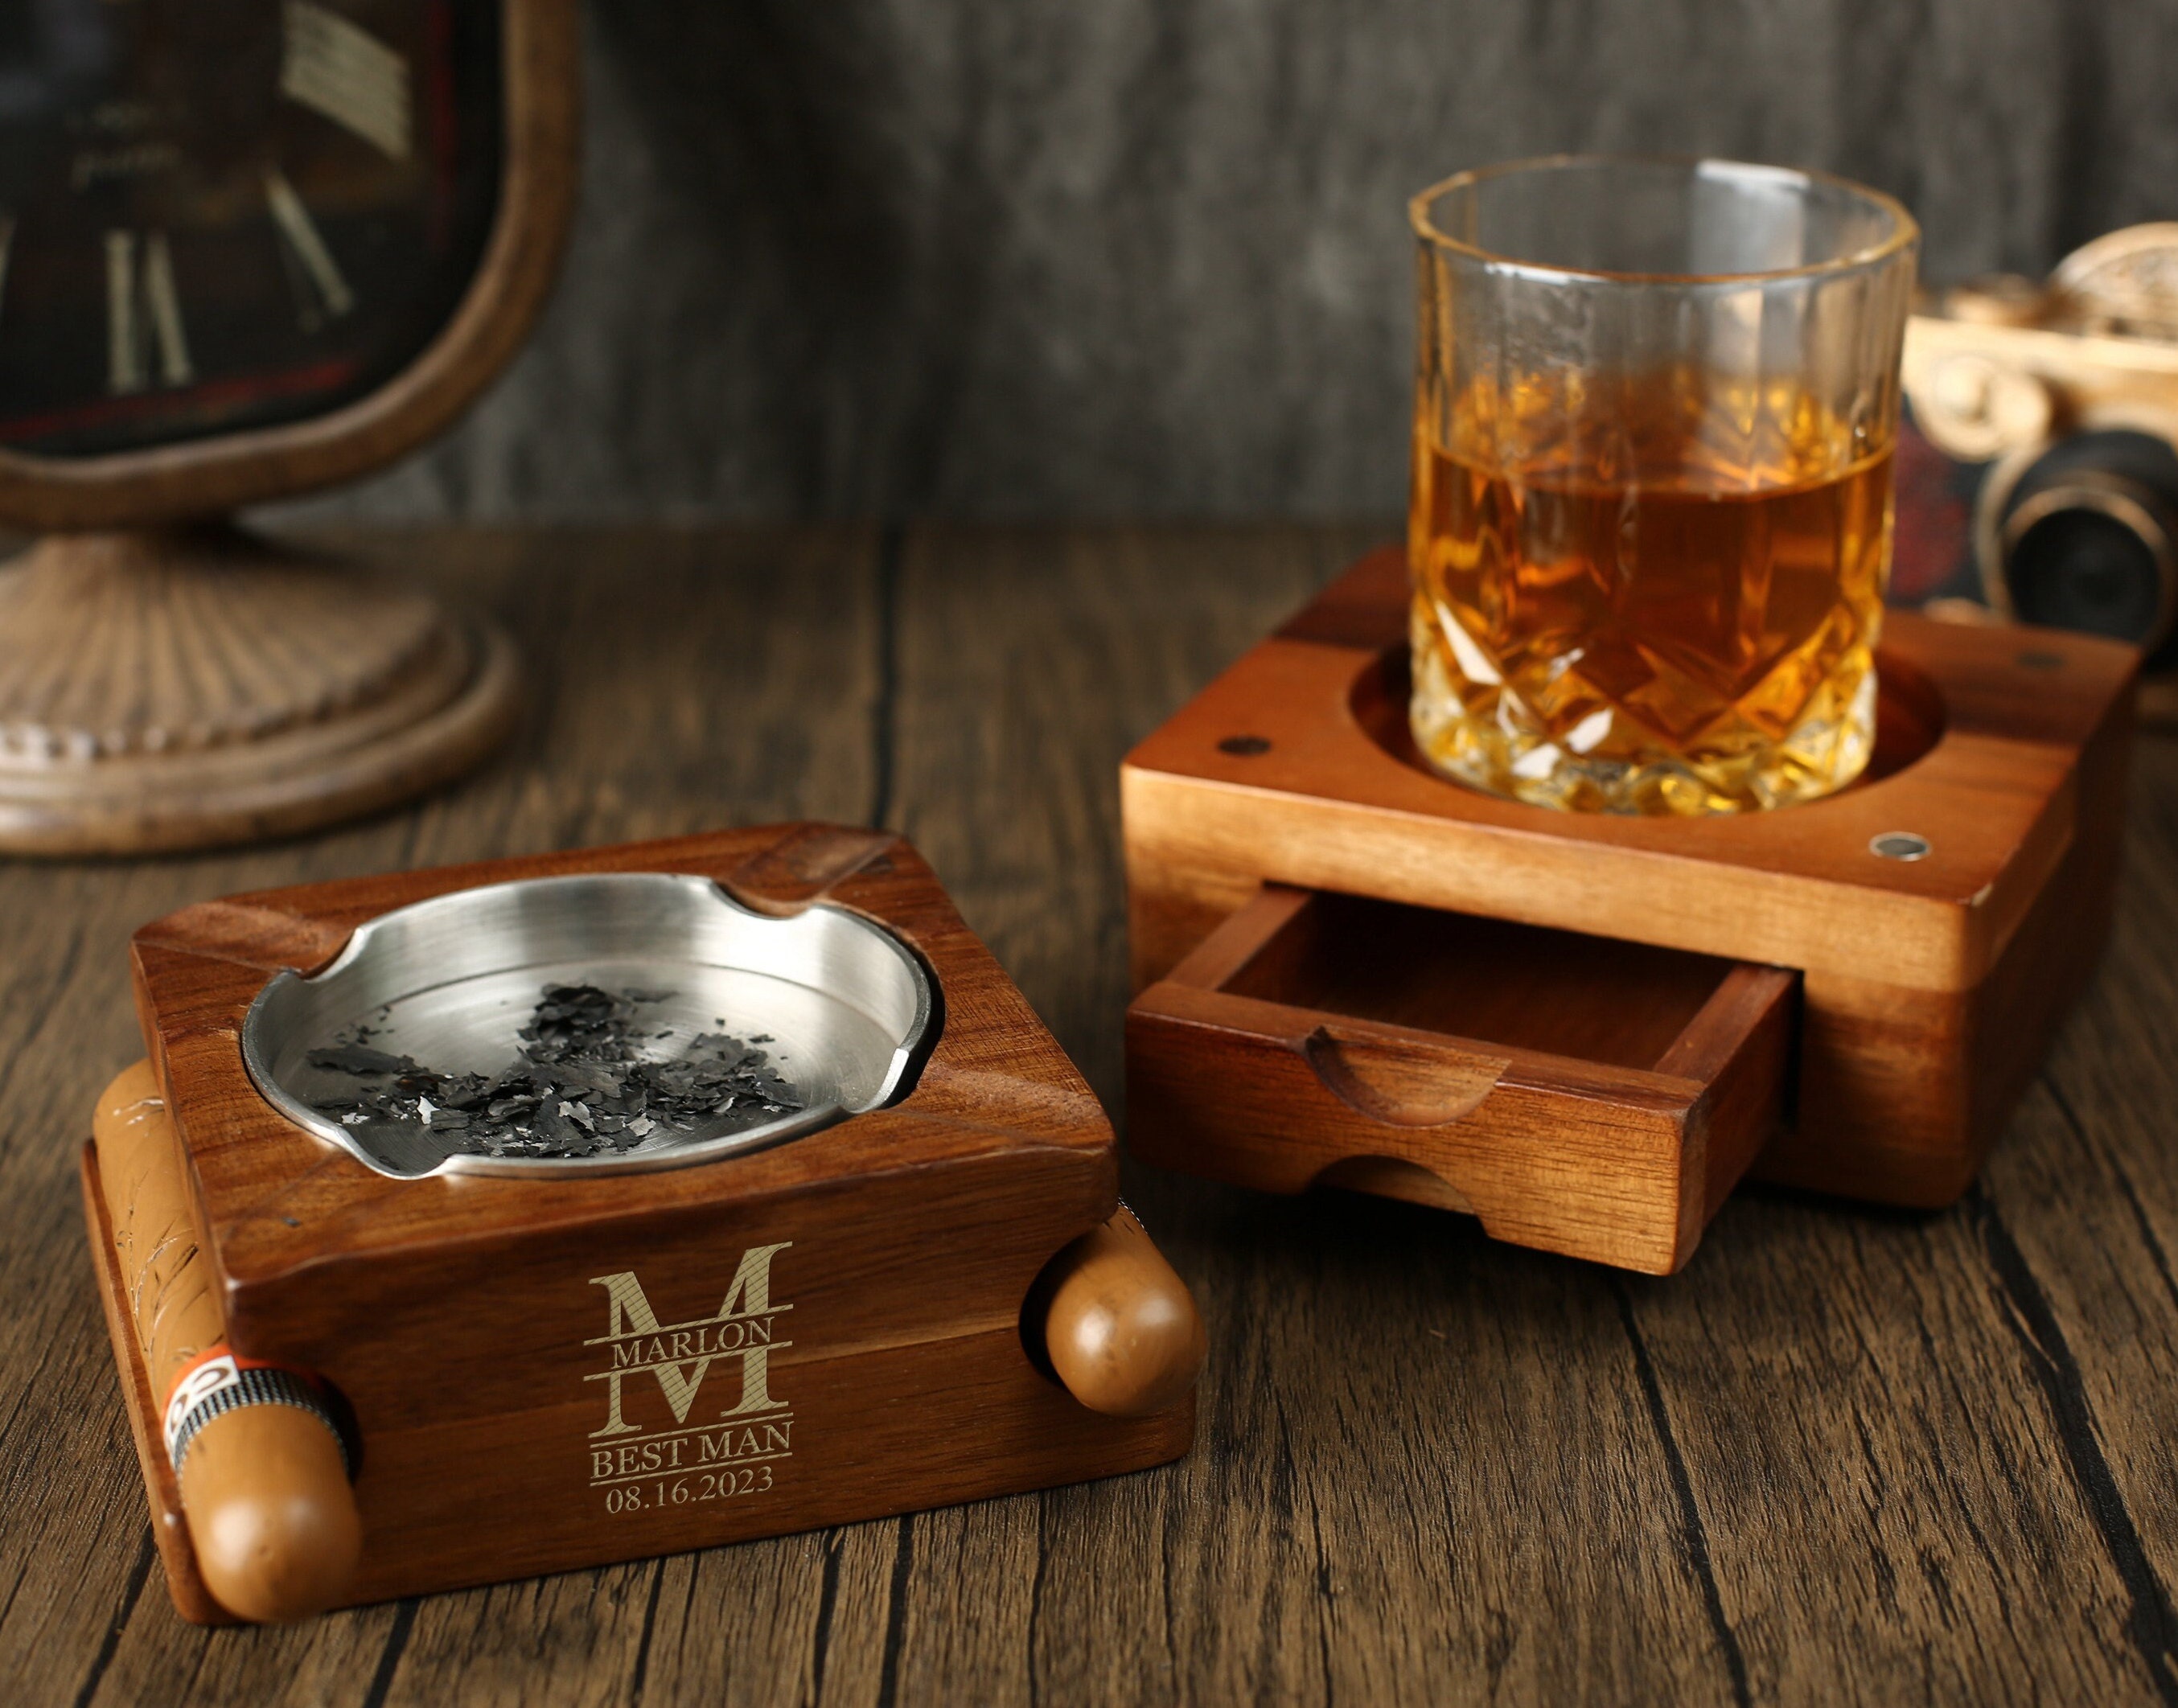 KOVOT Cigar Ashtray and Whiskey Glass Tray – Exquisite Rustic Wooden Tray  with Cocktail Glass Coaster – Wood Cigar Ashtray with Slot to Hold Cigar –